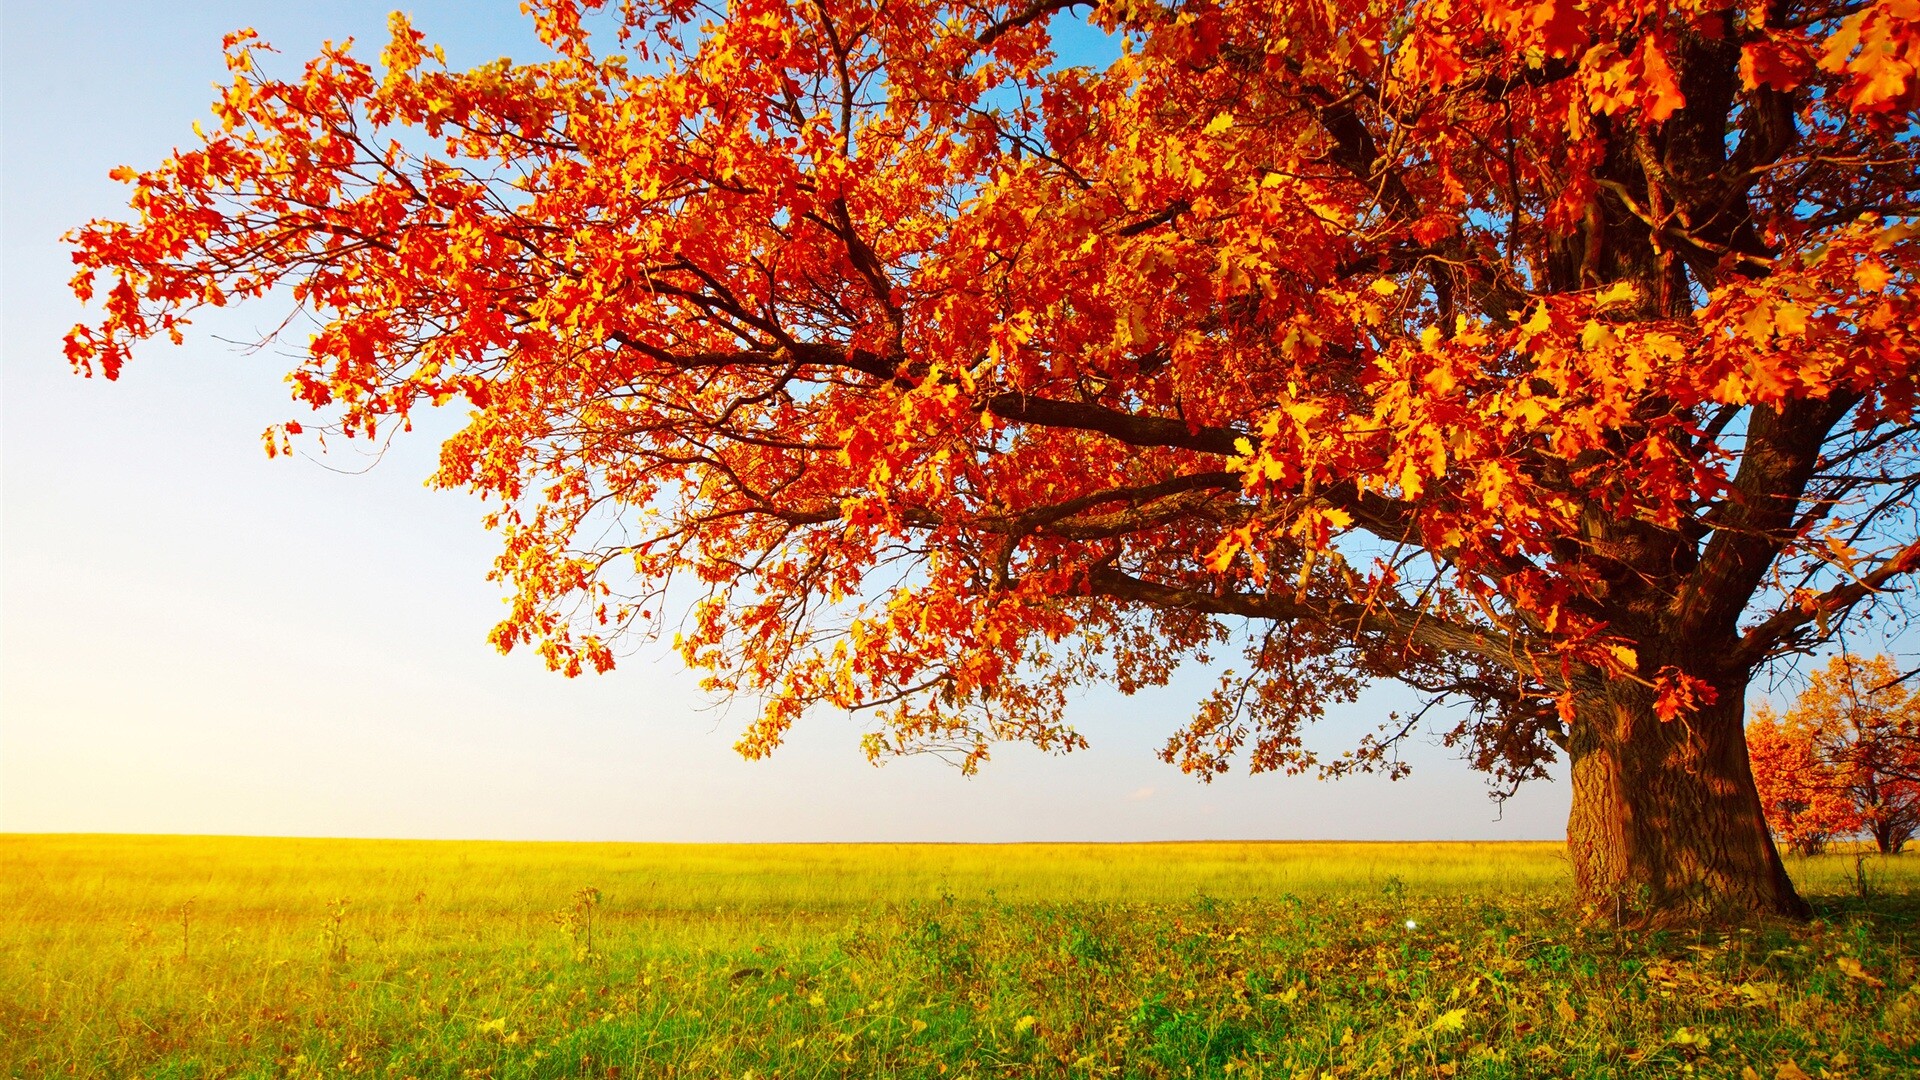 Autumn: Fall beauty, Brightly colored oak leaves. 1920x1080 Full HD Background.